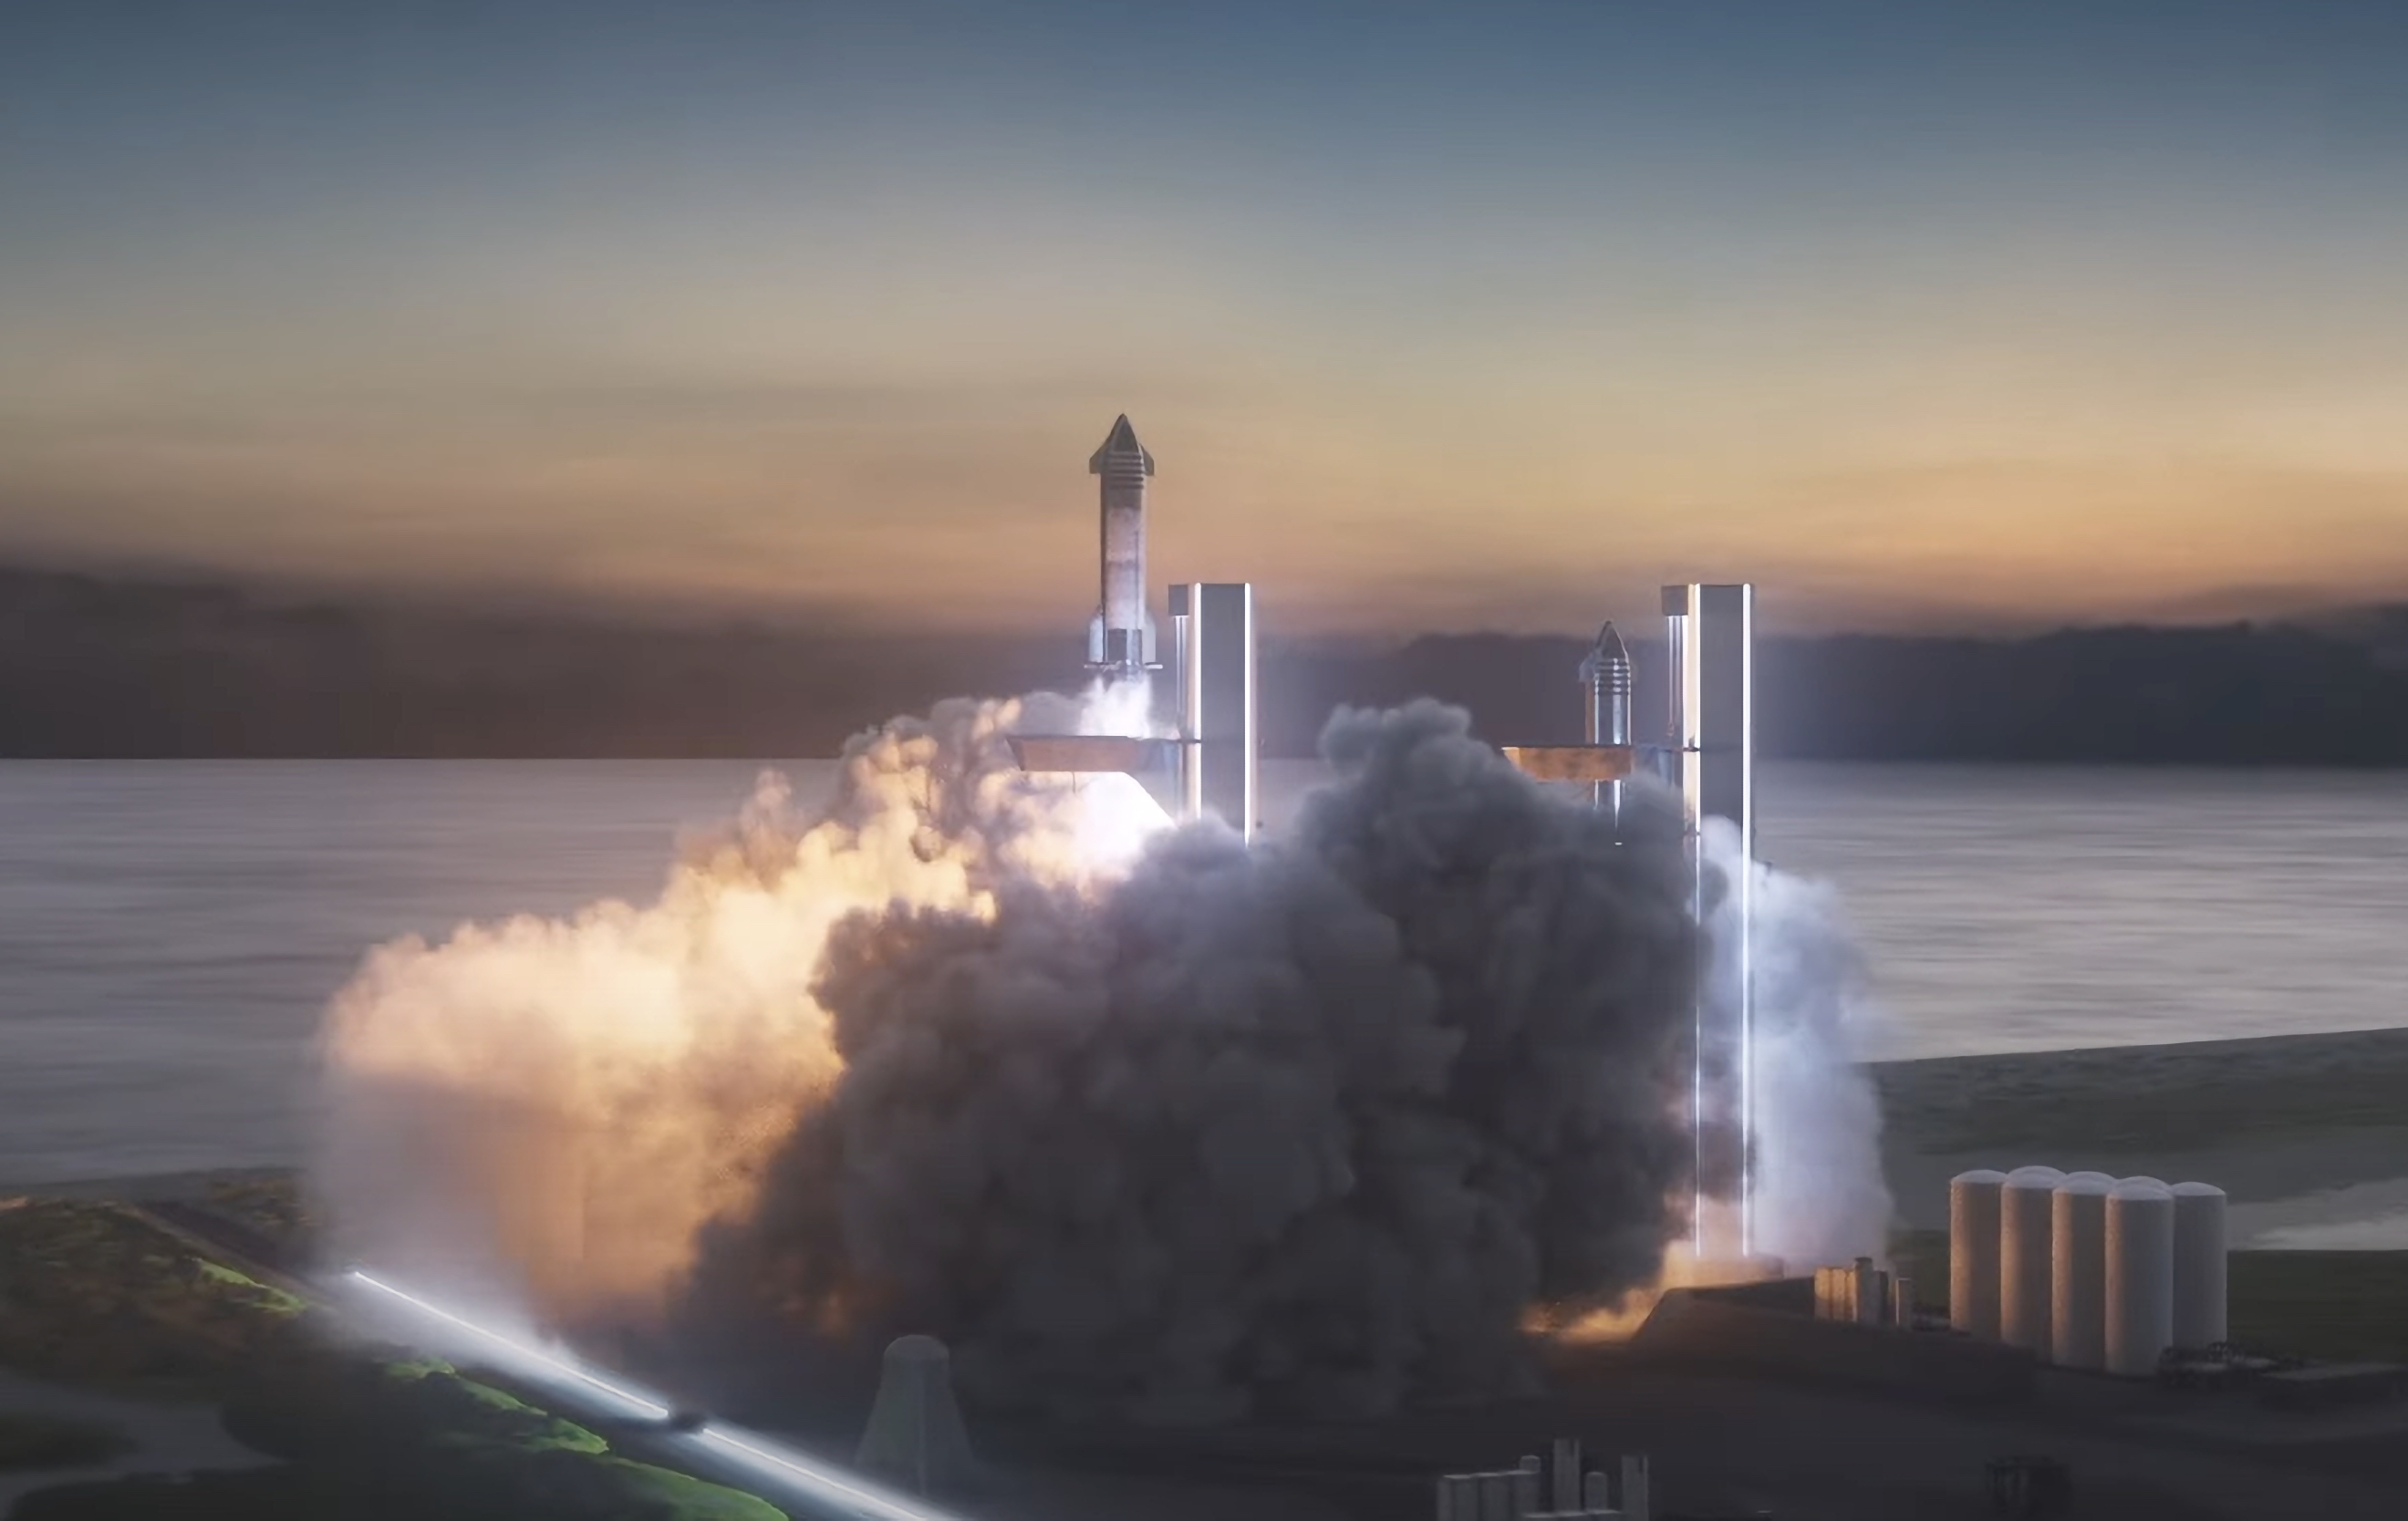 Daily Crunch: At SpaceX's Starship update event, Musk offers updates on  plans, progress | TechCrunch